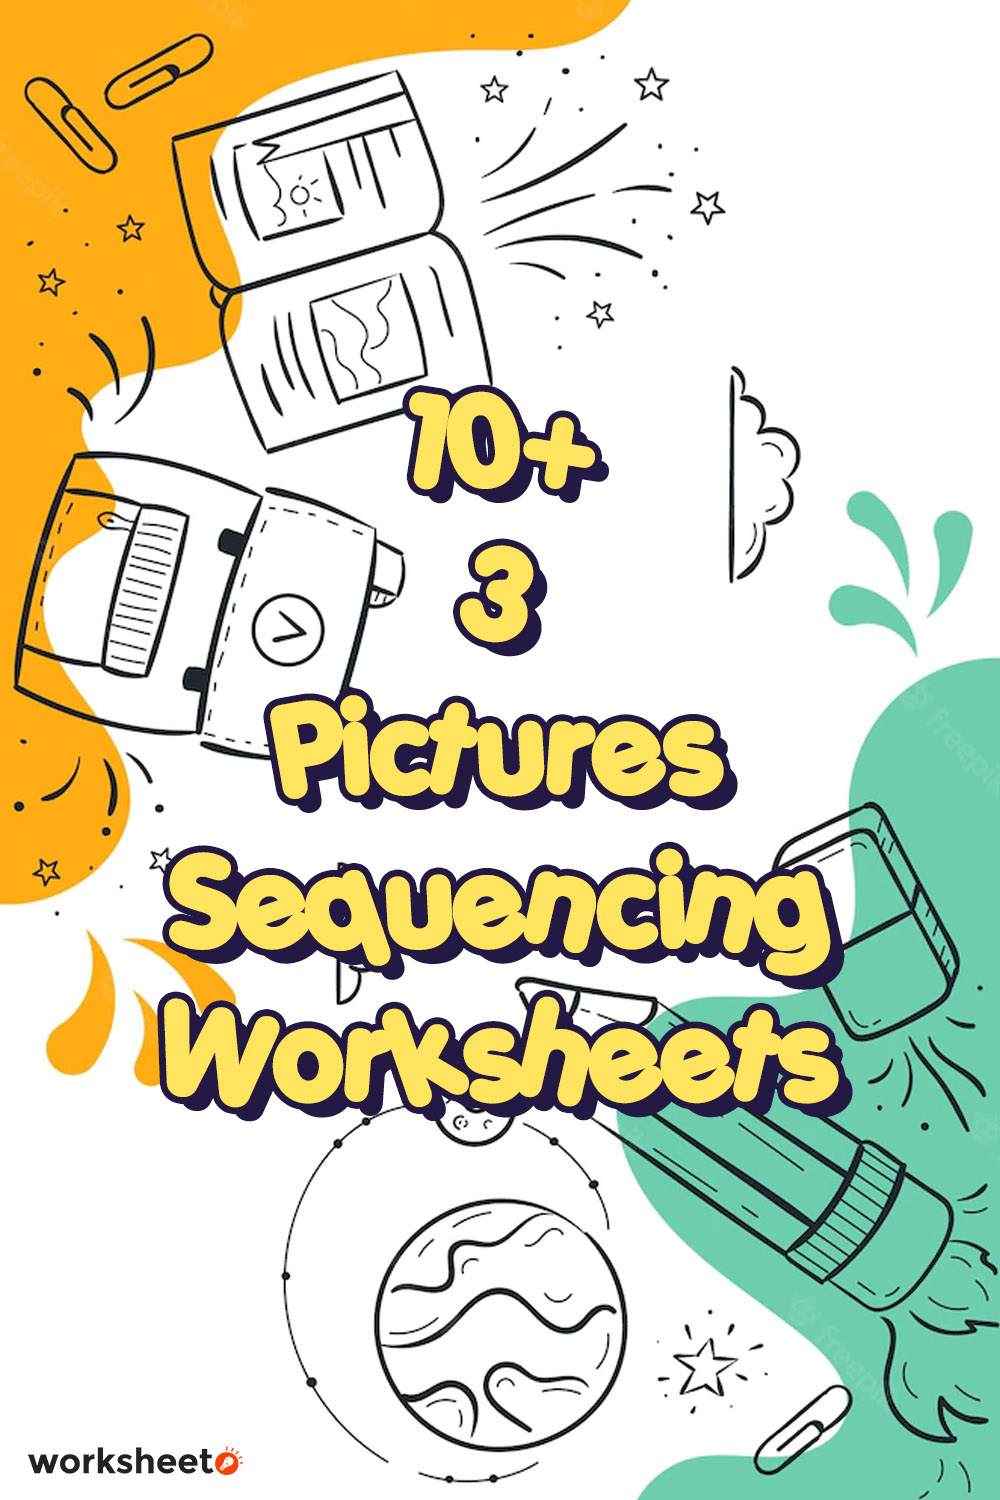 3 Pictures Sequencing Worksheets